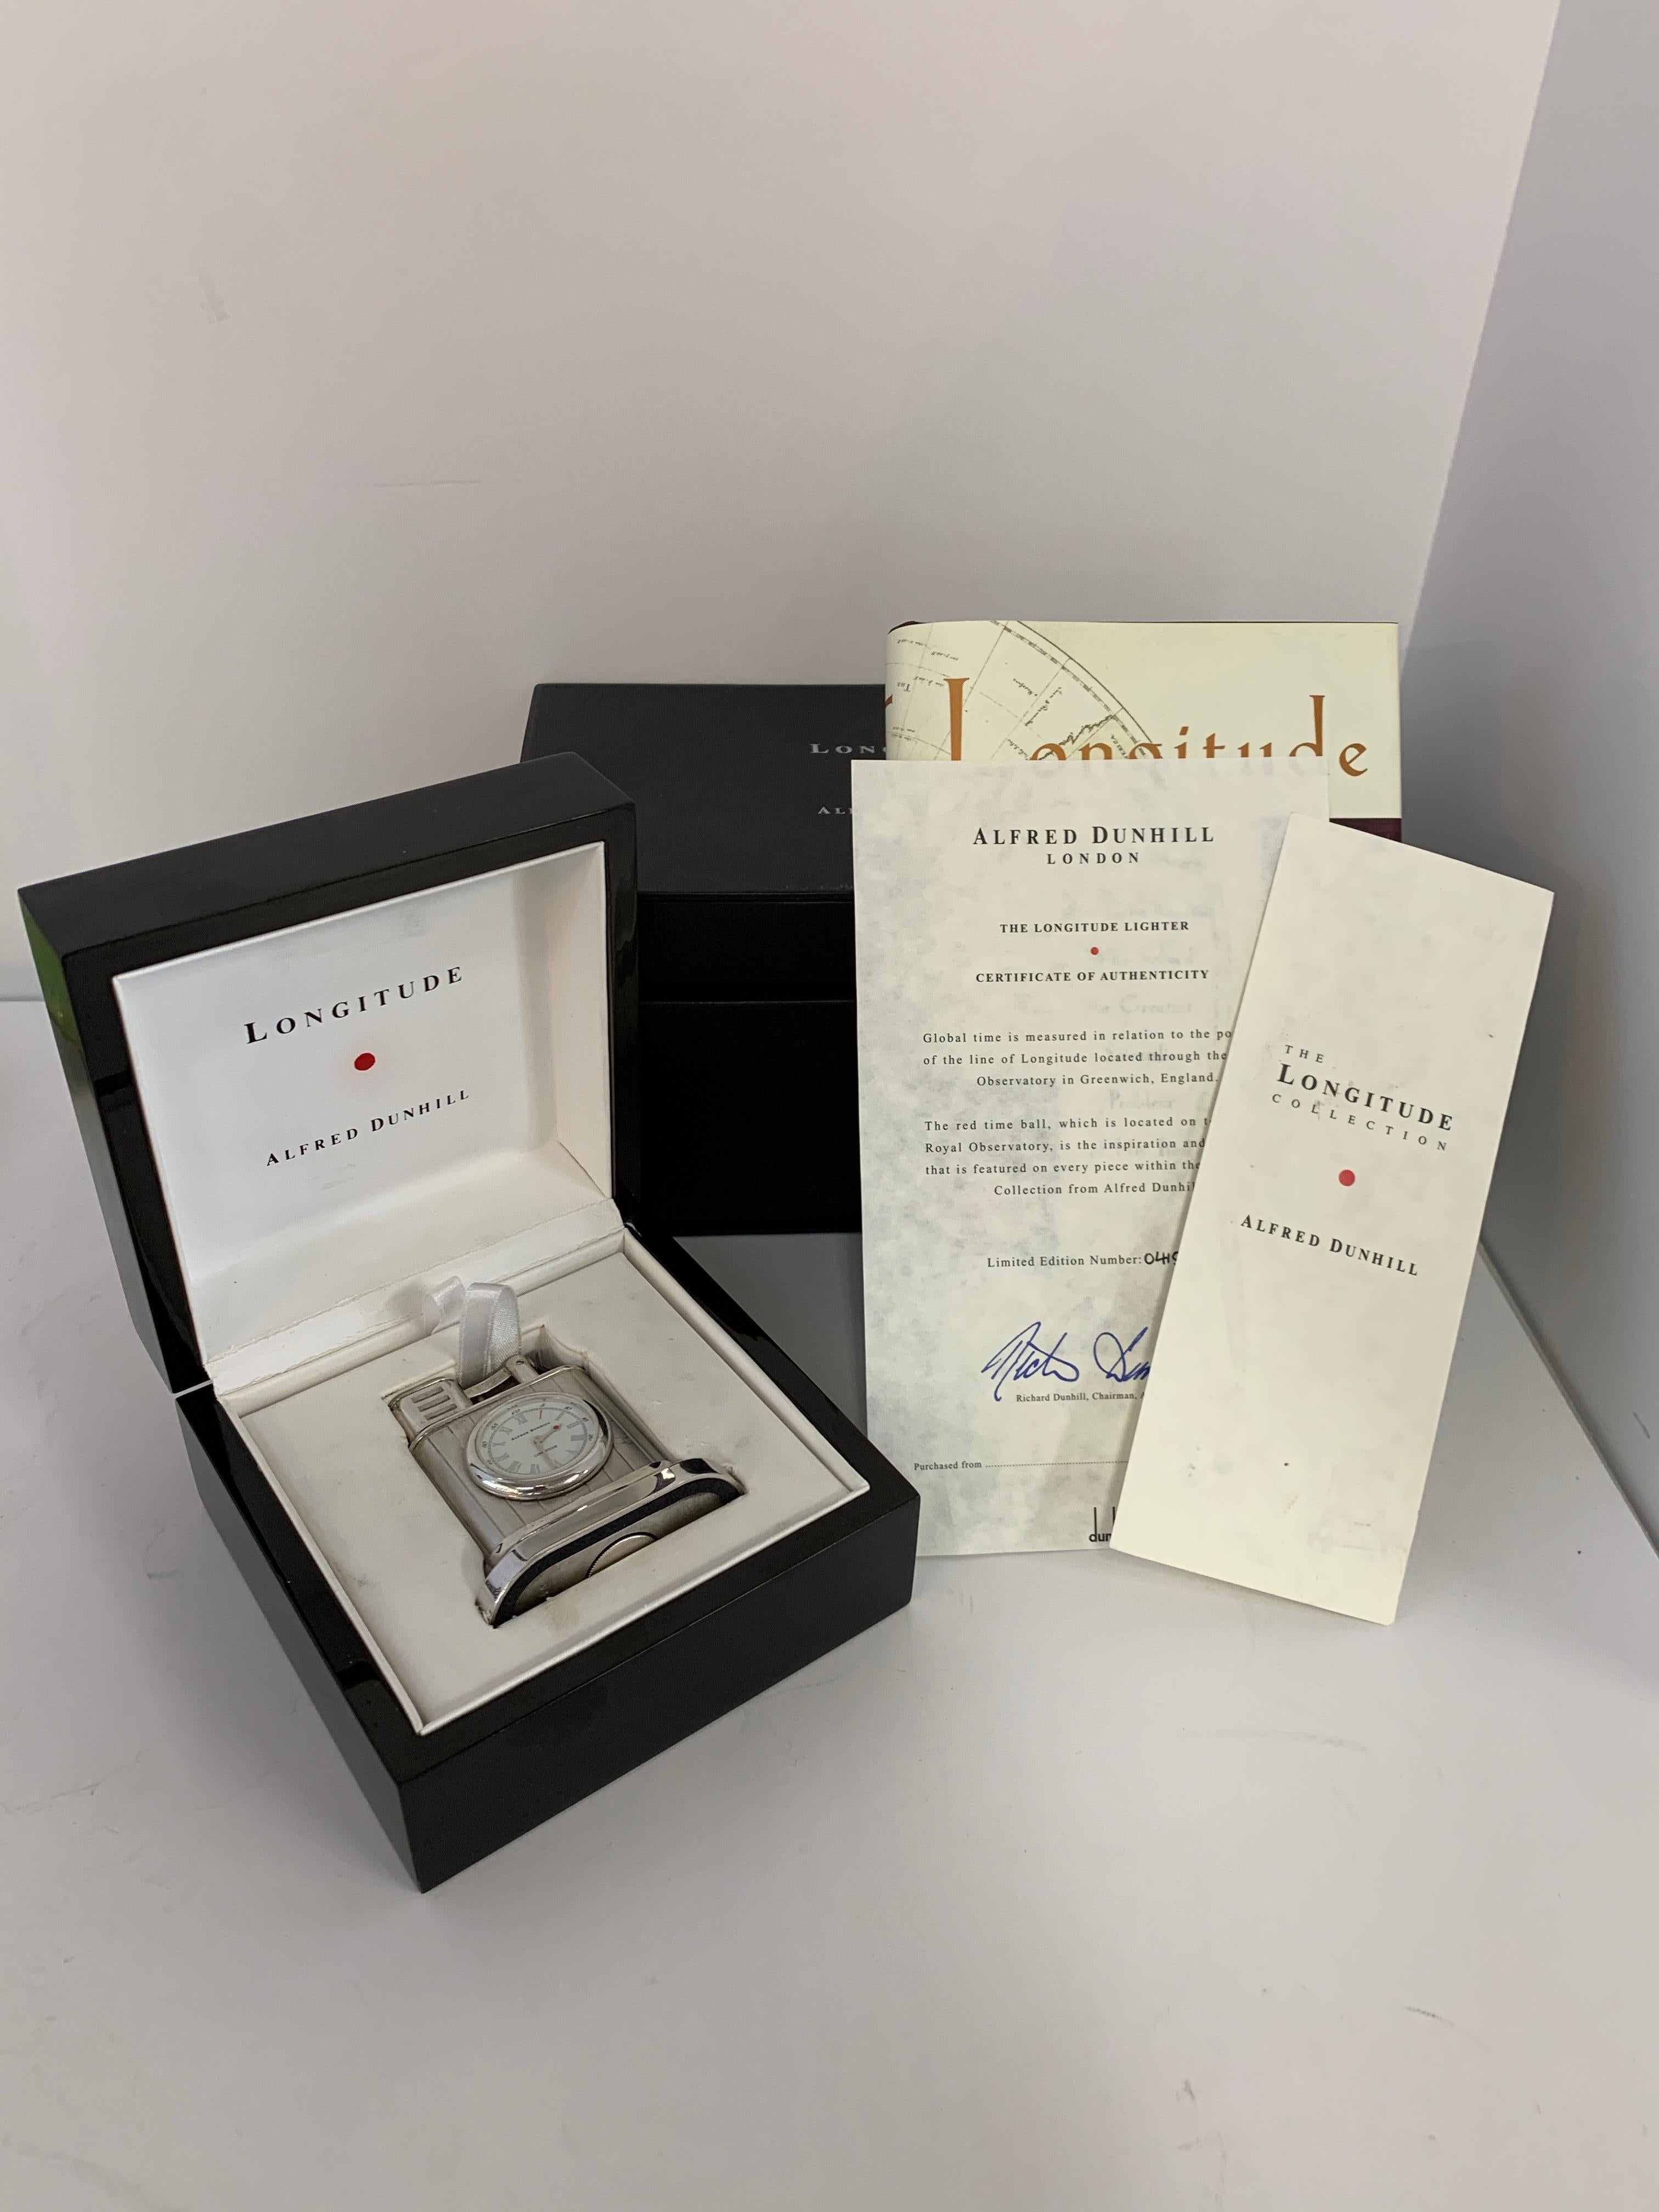 Dunhill limited edition silver plated lighter with a recessed clock called a Longitude. In its original box with all the paperwork as far as I can tell. it is number 415 out of 1300. Someone scratched the front of the lighter trying to remove the